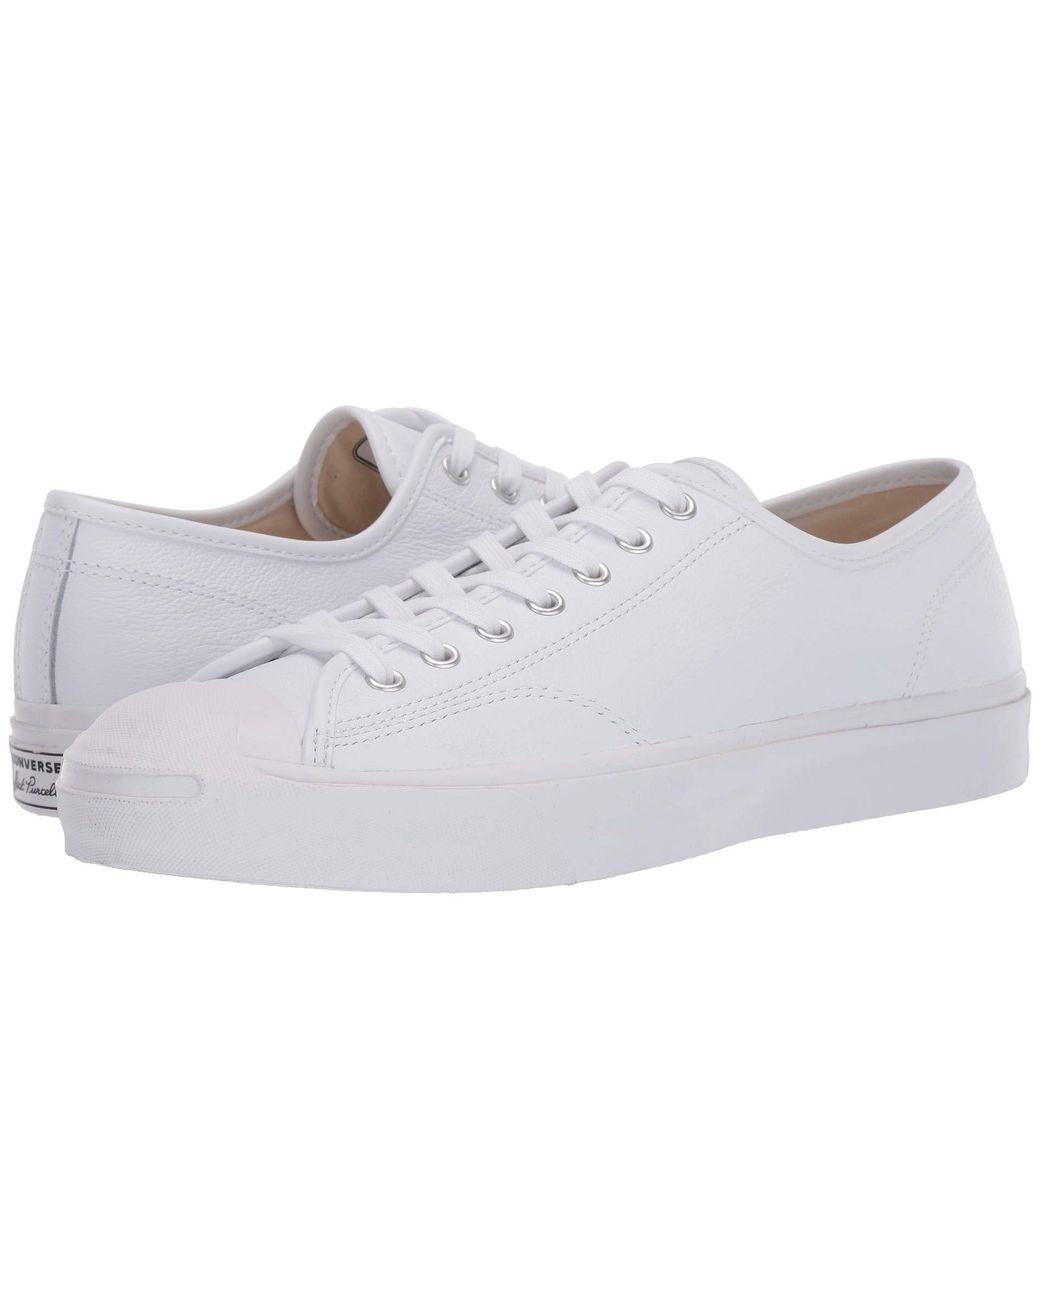 converse white gold leather